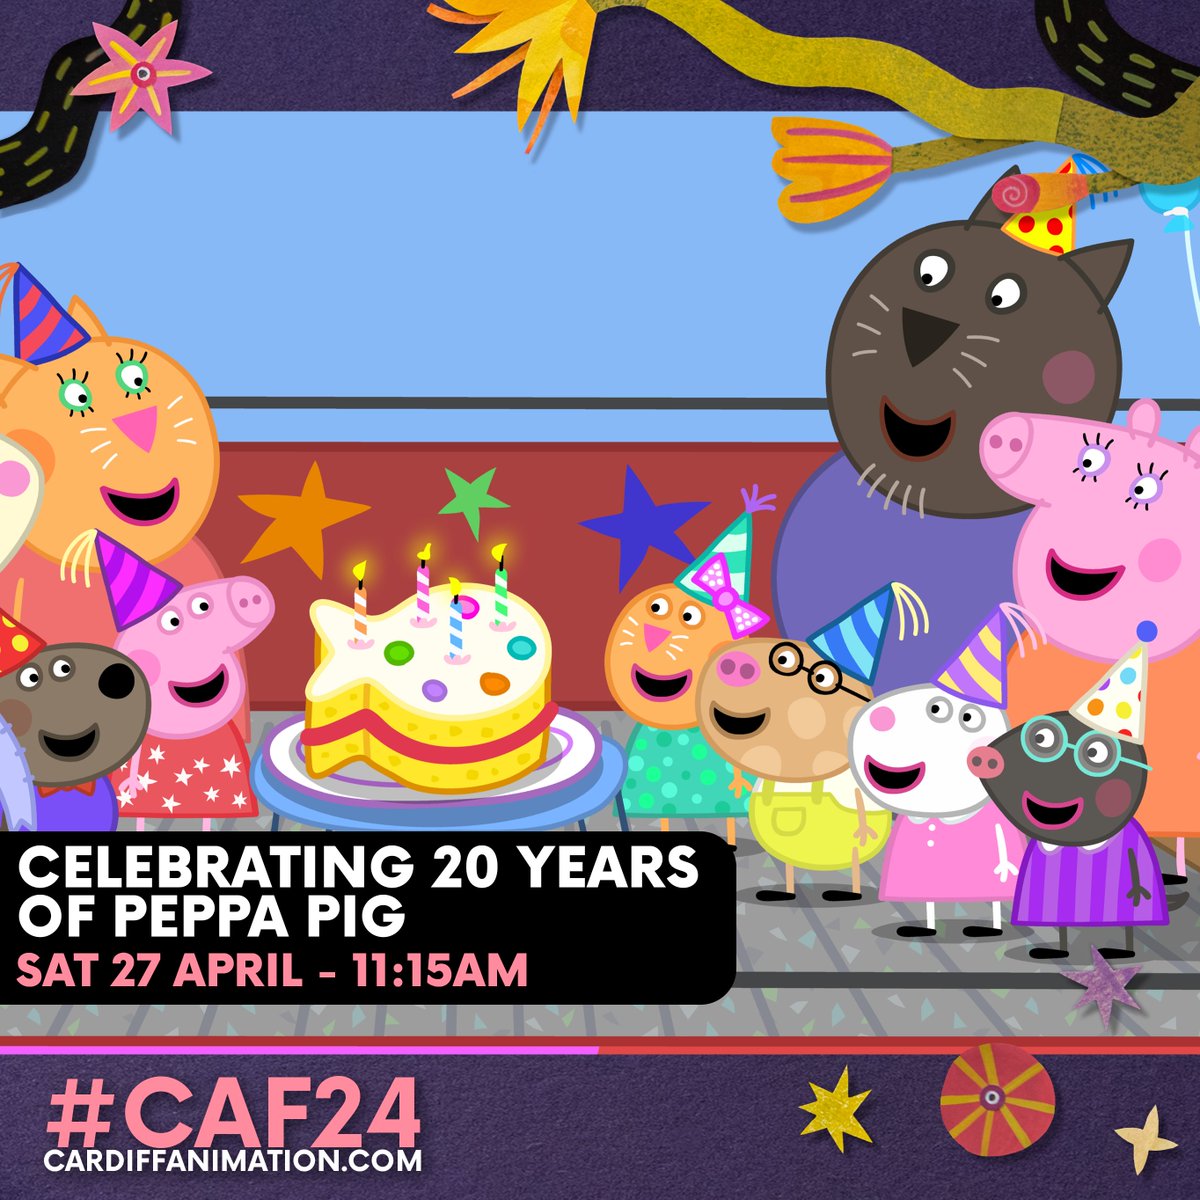 Peppa Pig is turning 20! Join us in celebrating as we go behind the scenes with @KarrotAnimation producer and co-founder Jamie Badminton and see 4 episodes on the big screen, including the anniversary special!🐷 🗓Sat 27 April ⏰11:15am 📍@chaptertweets 🎟bit.ly/peppapig-caf24